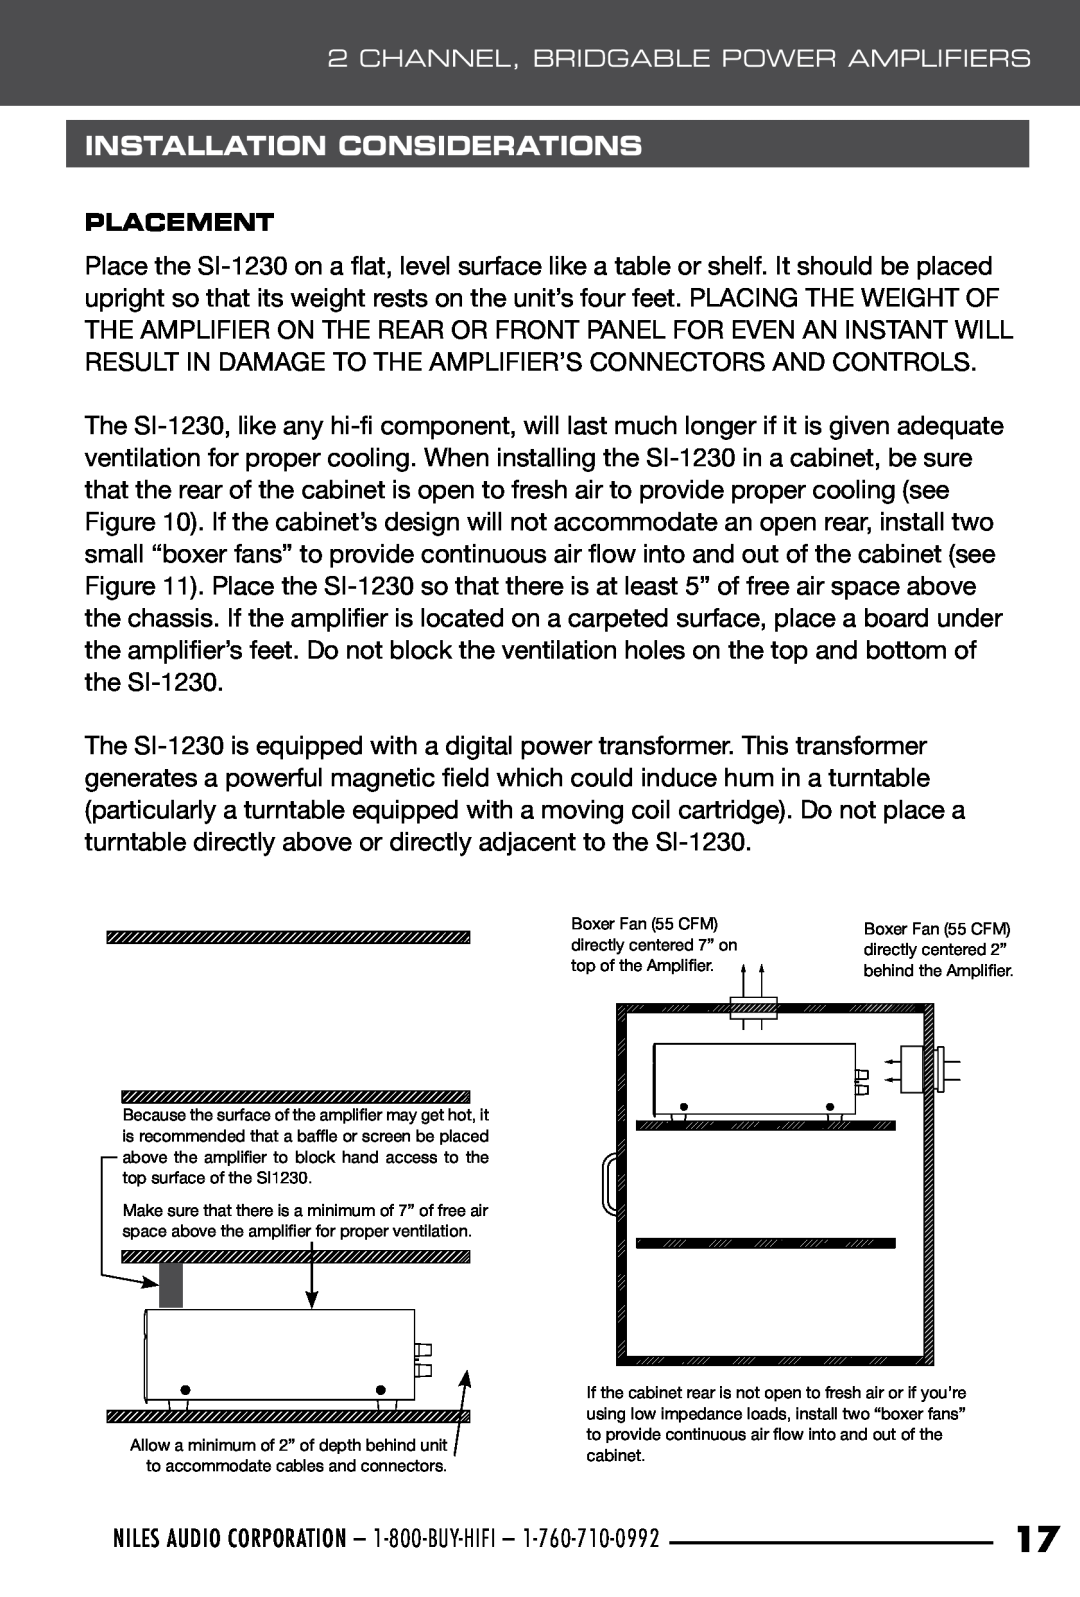 Niles Audio SI-1230 manual INSTALLATION Considerations, Placement 